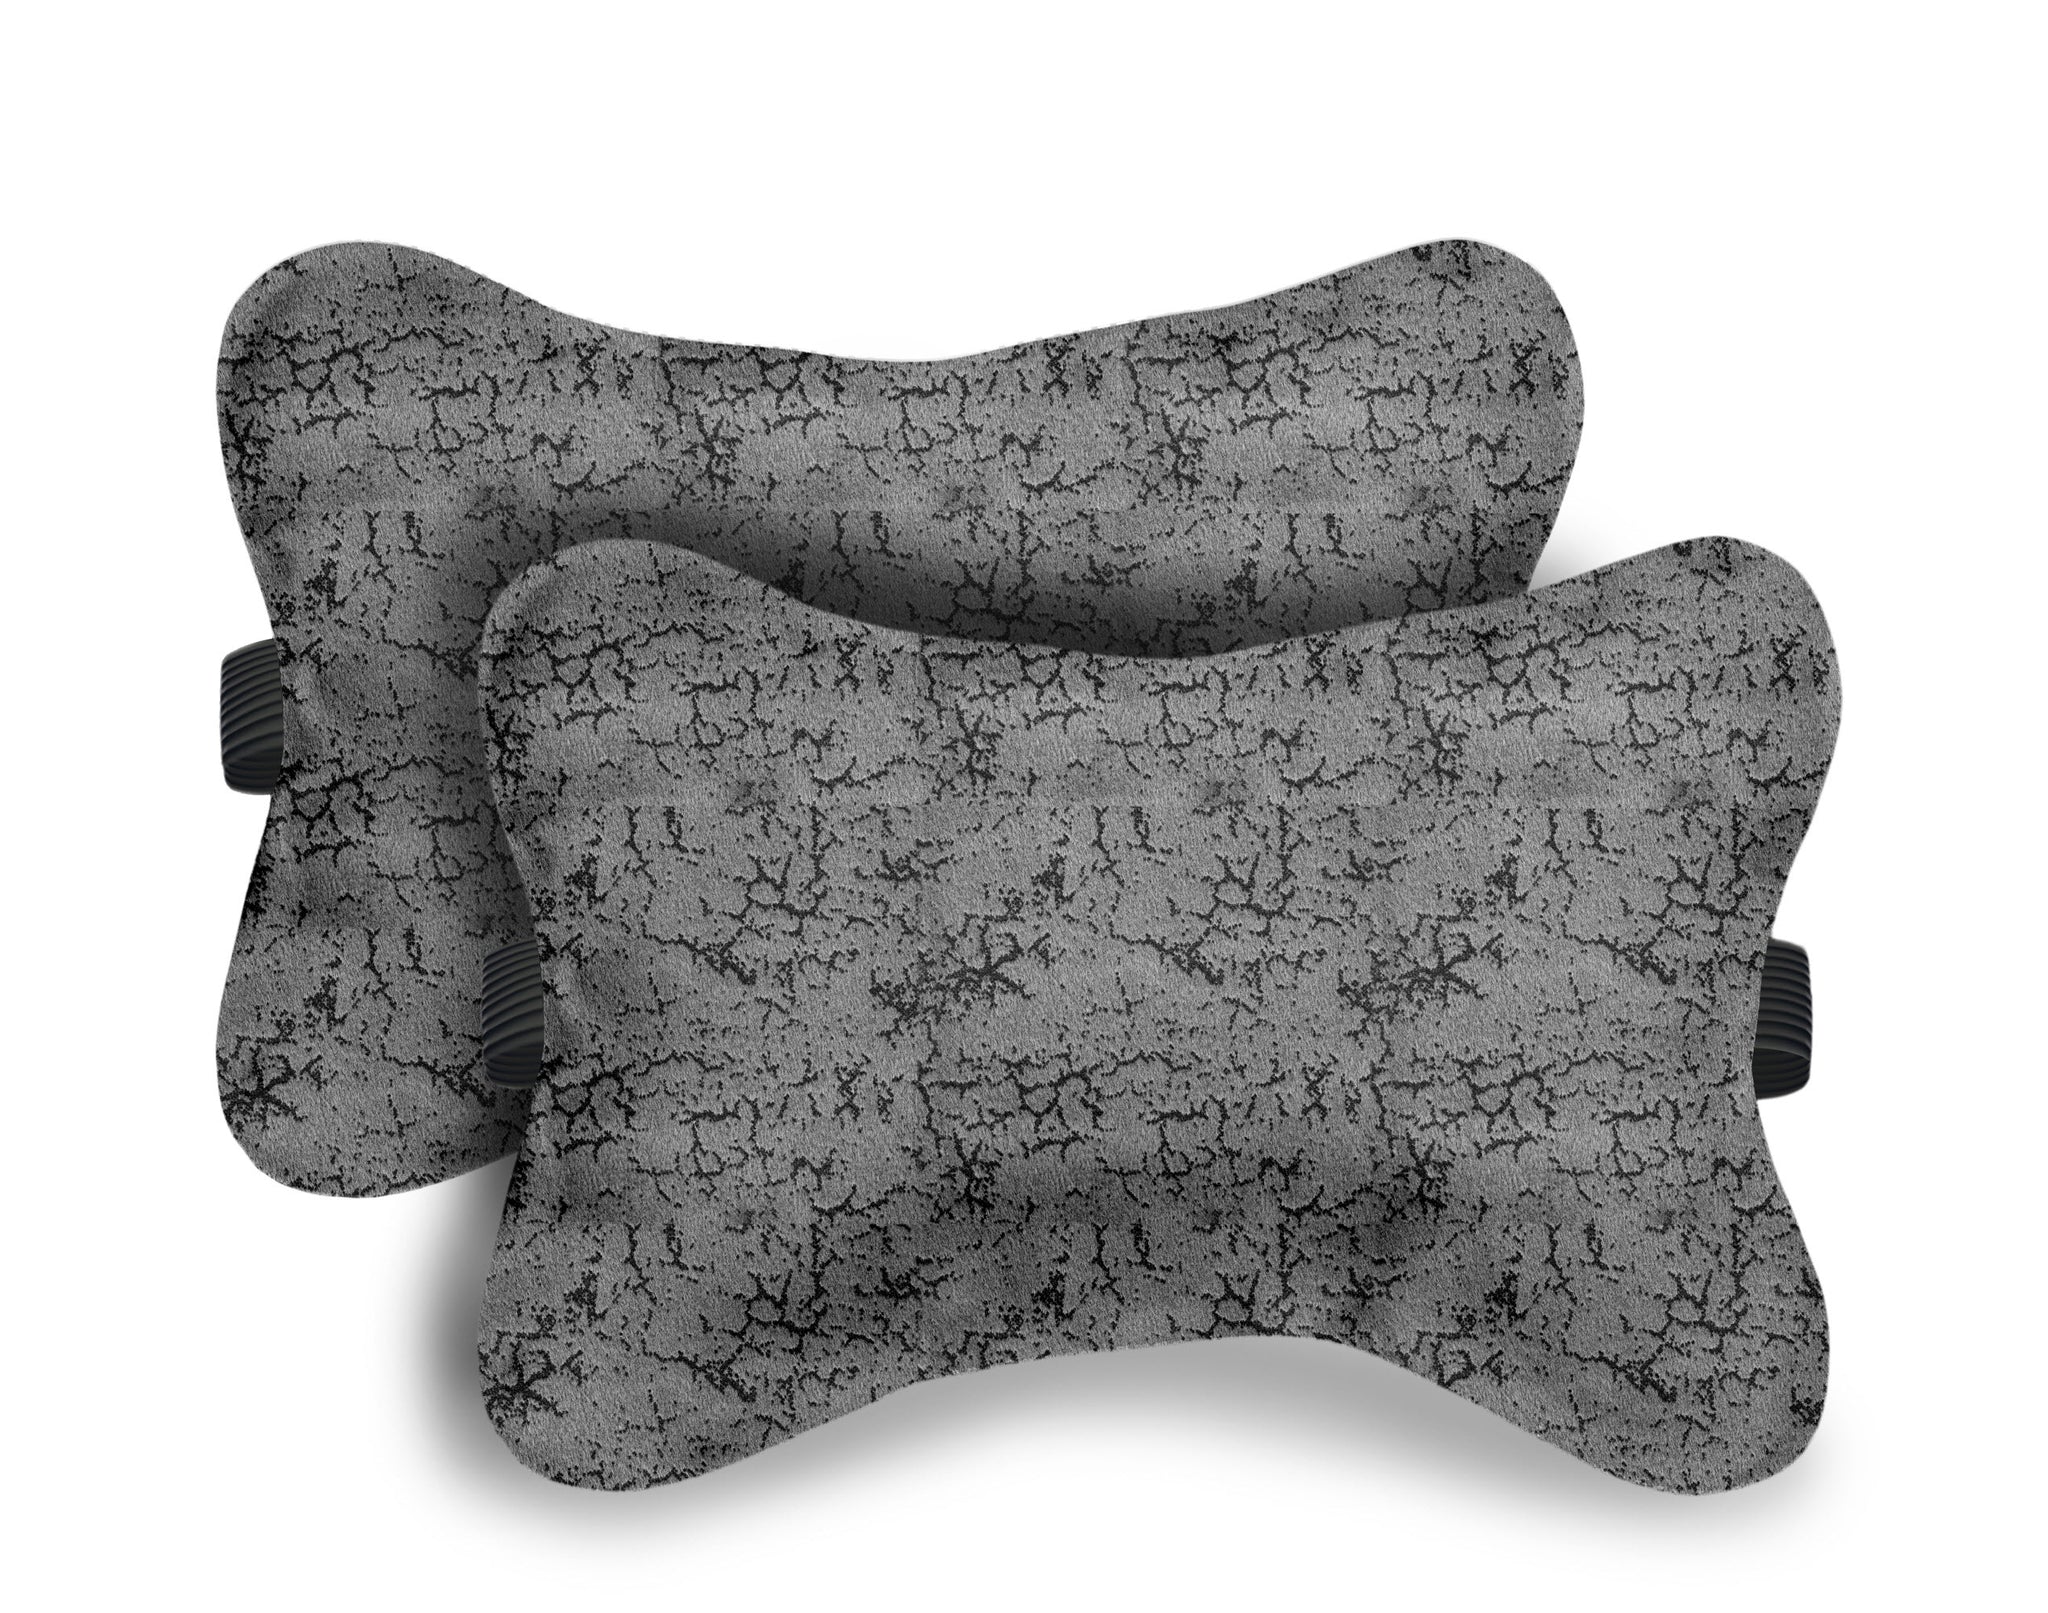 Car Seat Neck Rest Pillow, Cushion For All Cars, Premium Designer Chenille Lumbar, Back and Headrest Support for Car Seat, Size 17x27 cms, Dark Grey Velvet, Set of 2 by Lushomes